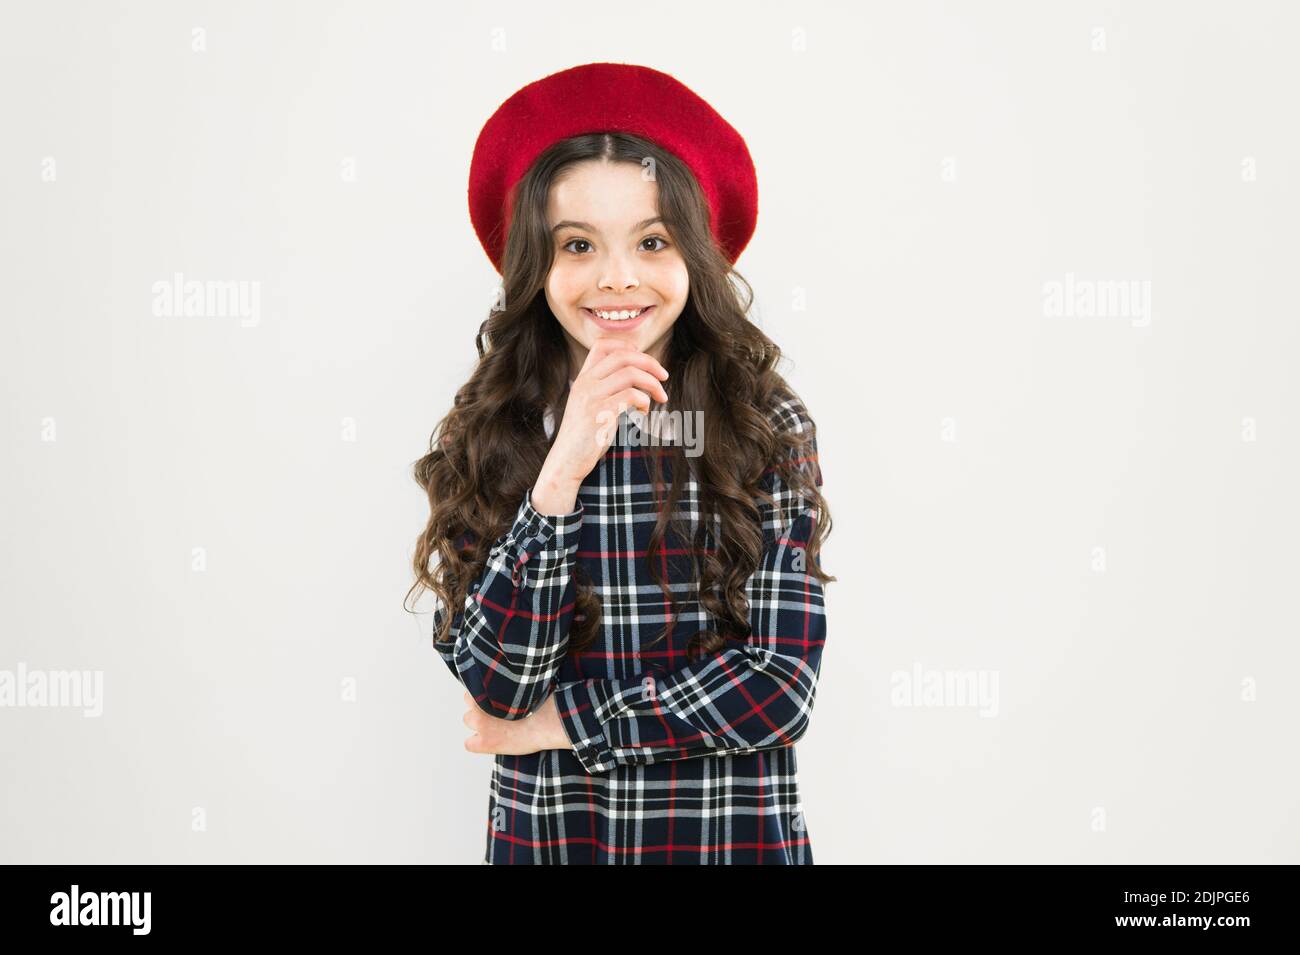 Fancy accessory. Child long curly hair wearing beret hat. Happy schoolgirl  stylish uniform. Happy childhood concept. Happy smiling cheerful kid  portrait. Small girl nice hairstyle. Fashion shop Stock Photo - Alamy